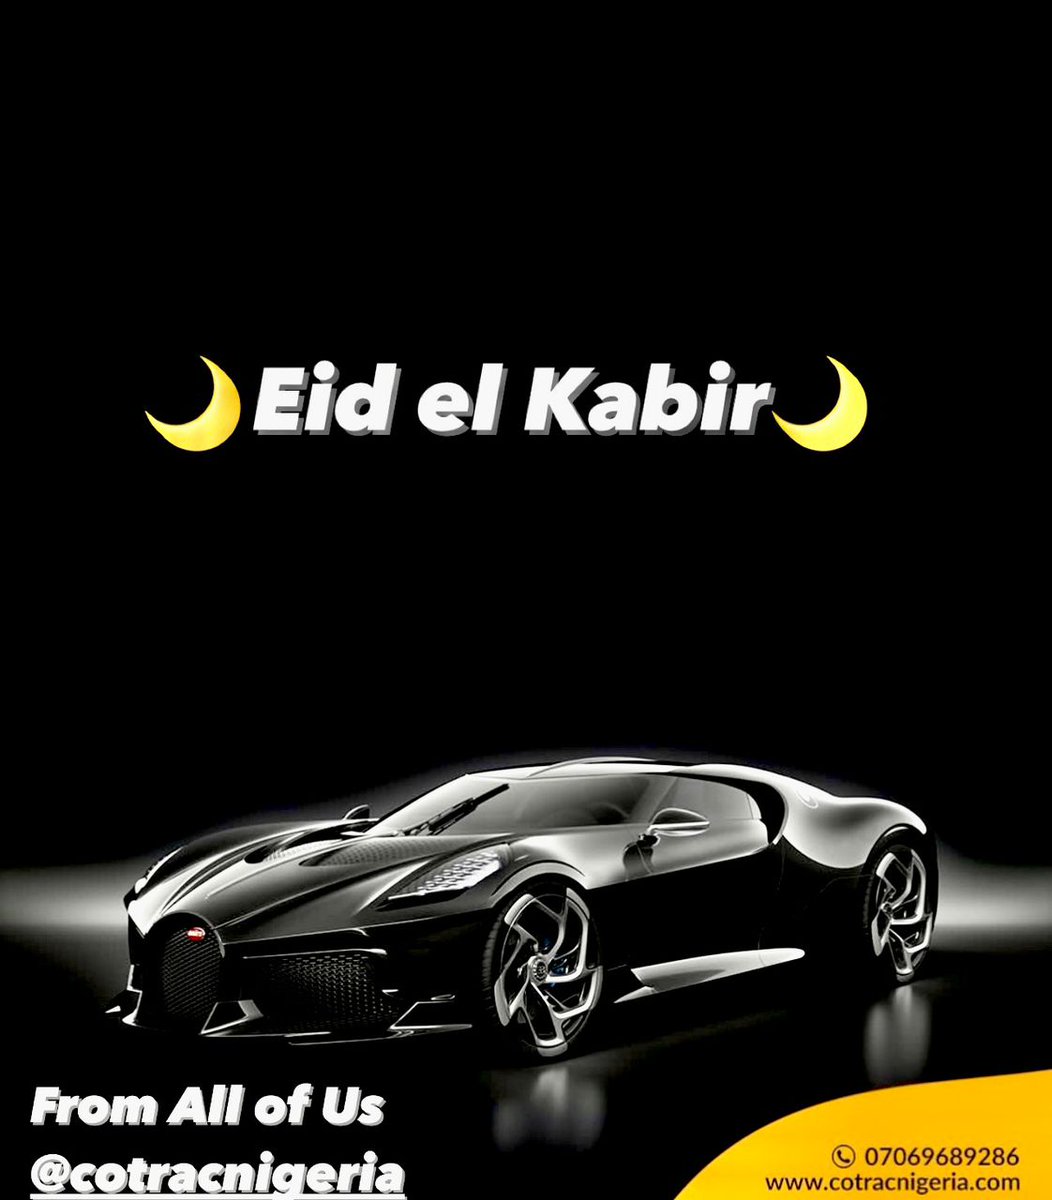 🌙 Eid el Kabir🌙
Wishing all our Muslim customers a joyous and blessed Eid el Kabir celebration. May your hearts be filled with happiness, love&peace during this festive season.

From all of Us @CoTracNGR 
#EidElKabir #Sallah #Celebration #PublicHoliday #CoTrac #AlwaysInControl